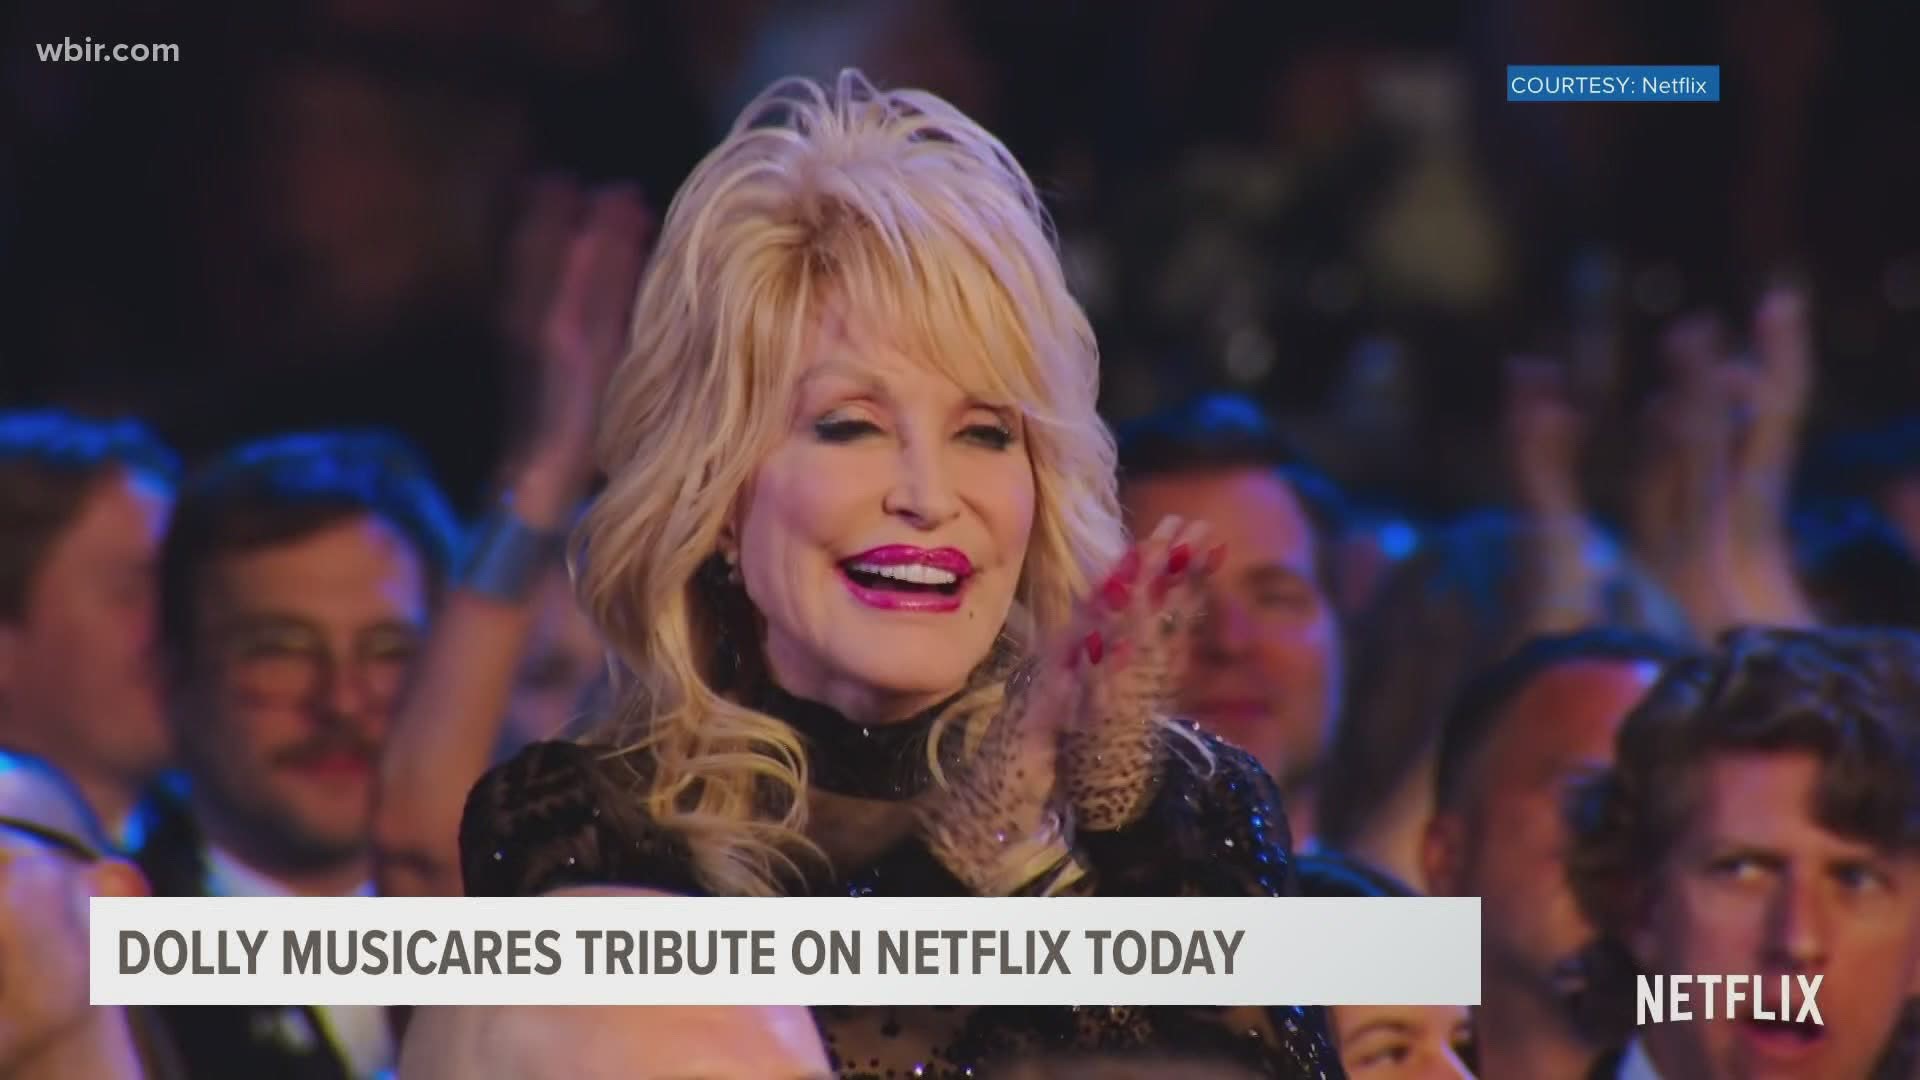 "Dolly Parton: A MusiCares Tribute" was taped just before the Grammy Awards in 2019.